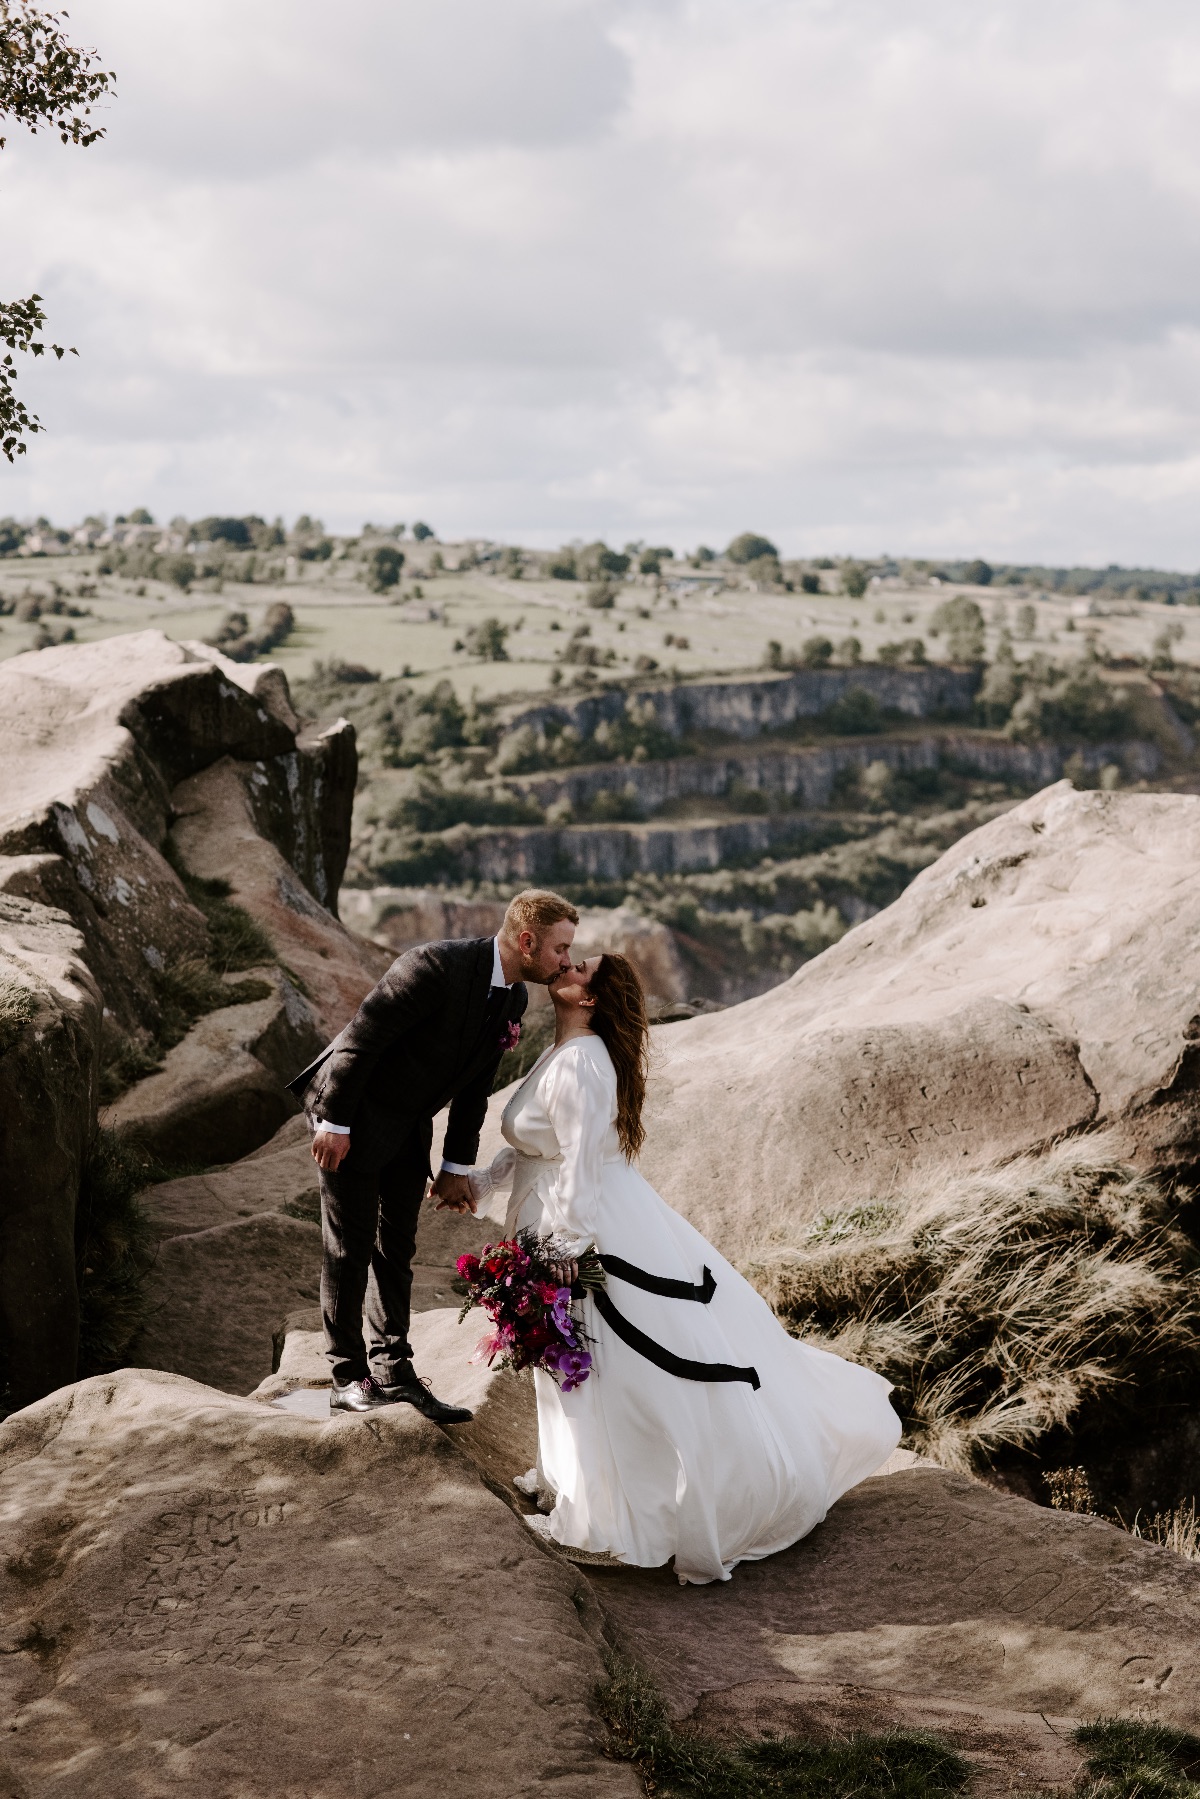 Chloe's stunning bespoke dress paired with vans for a quick climb up black rocks. 